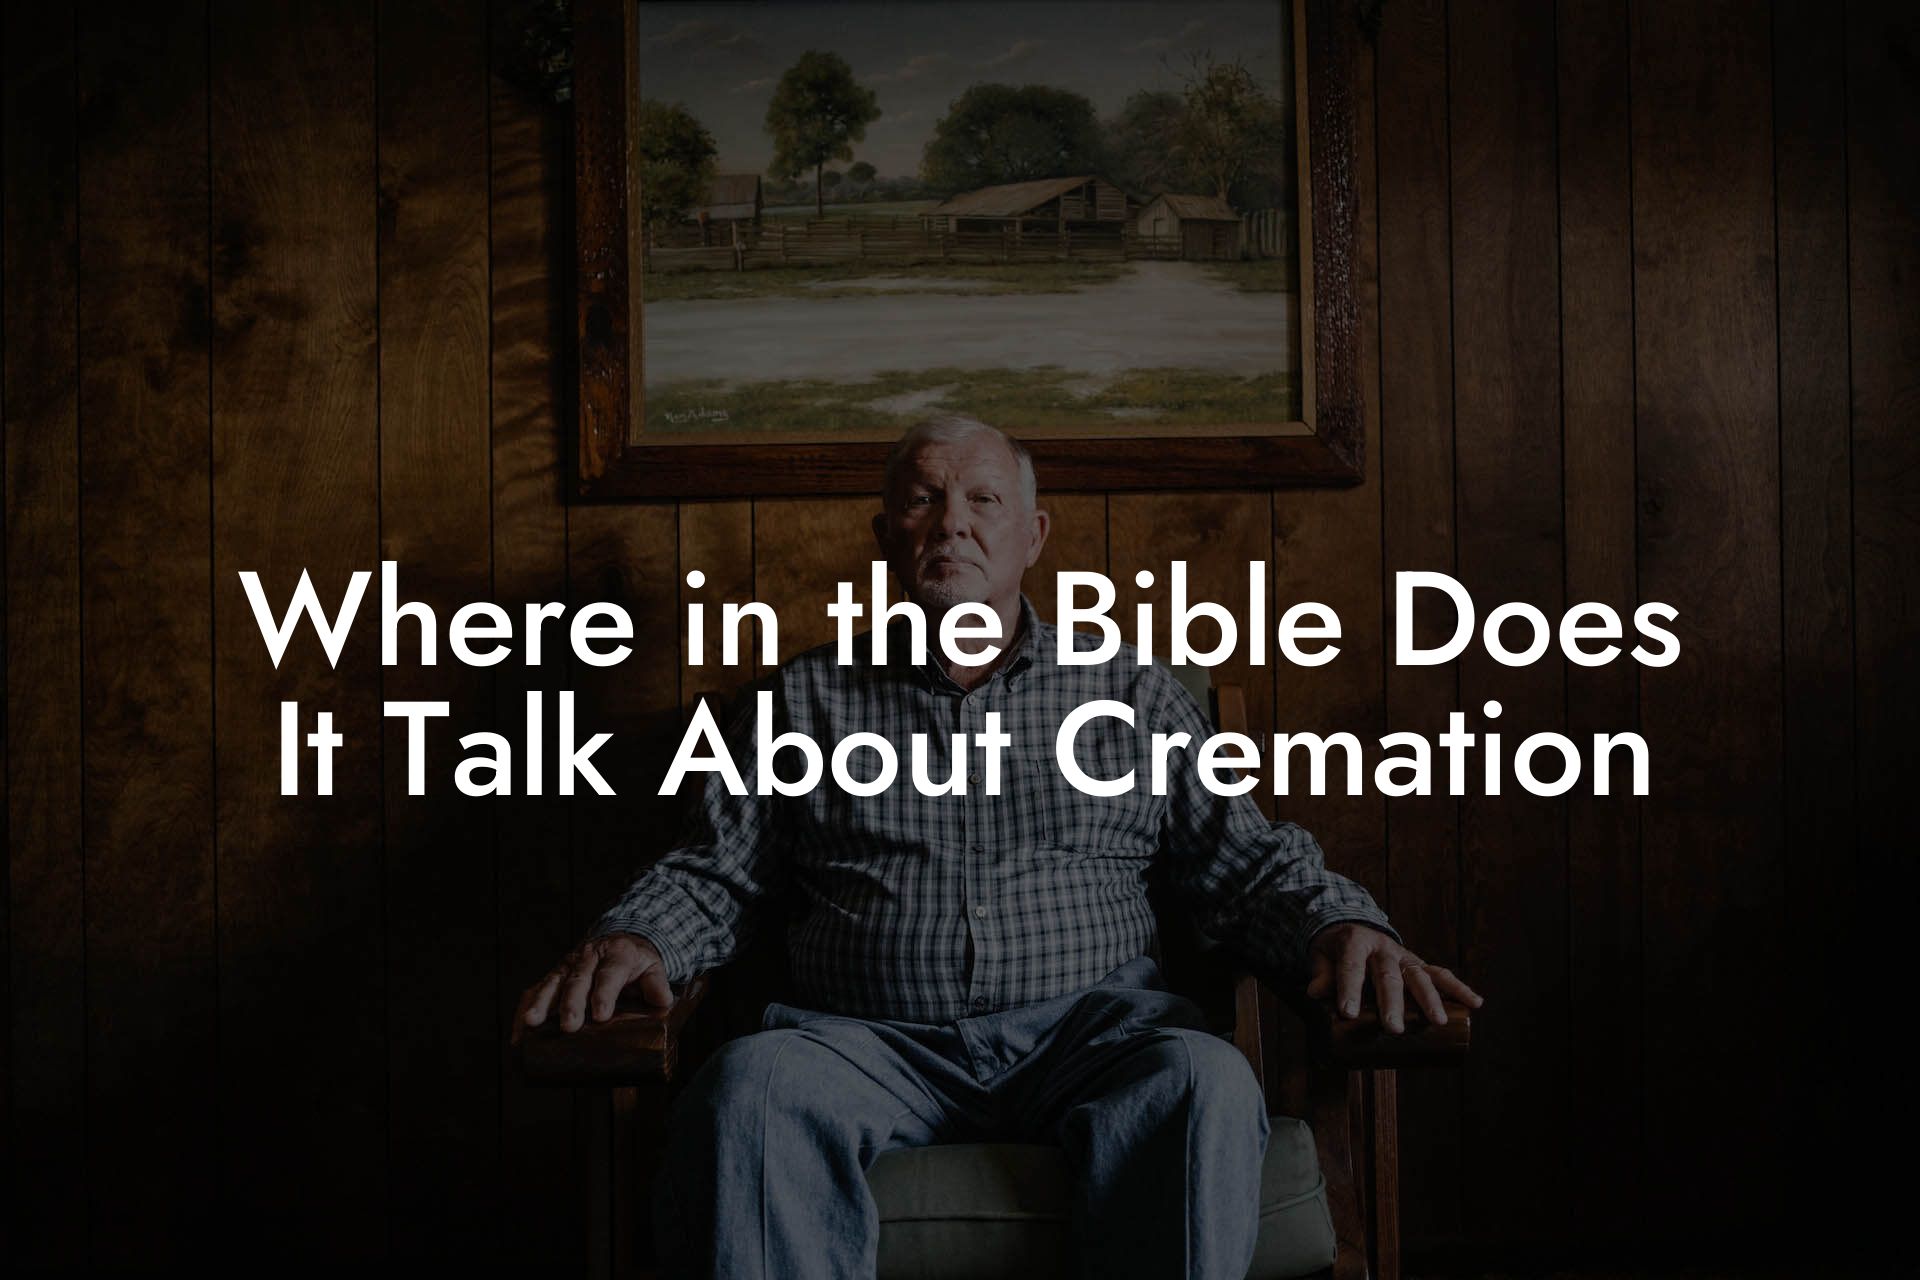 Where in the Bible Does It Talk About Cremation